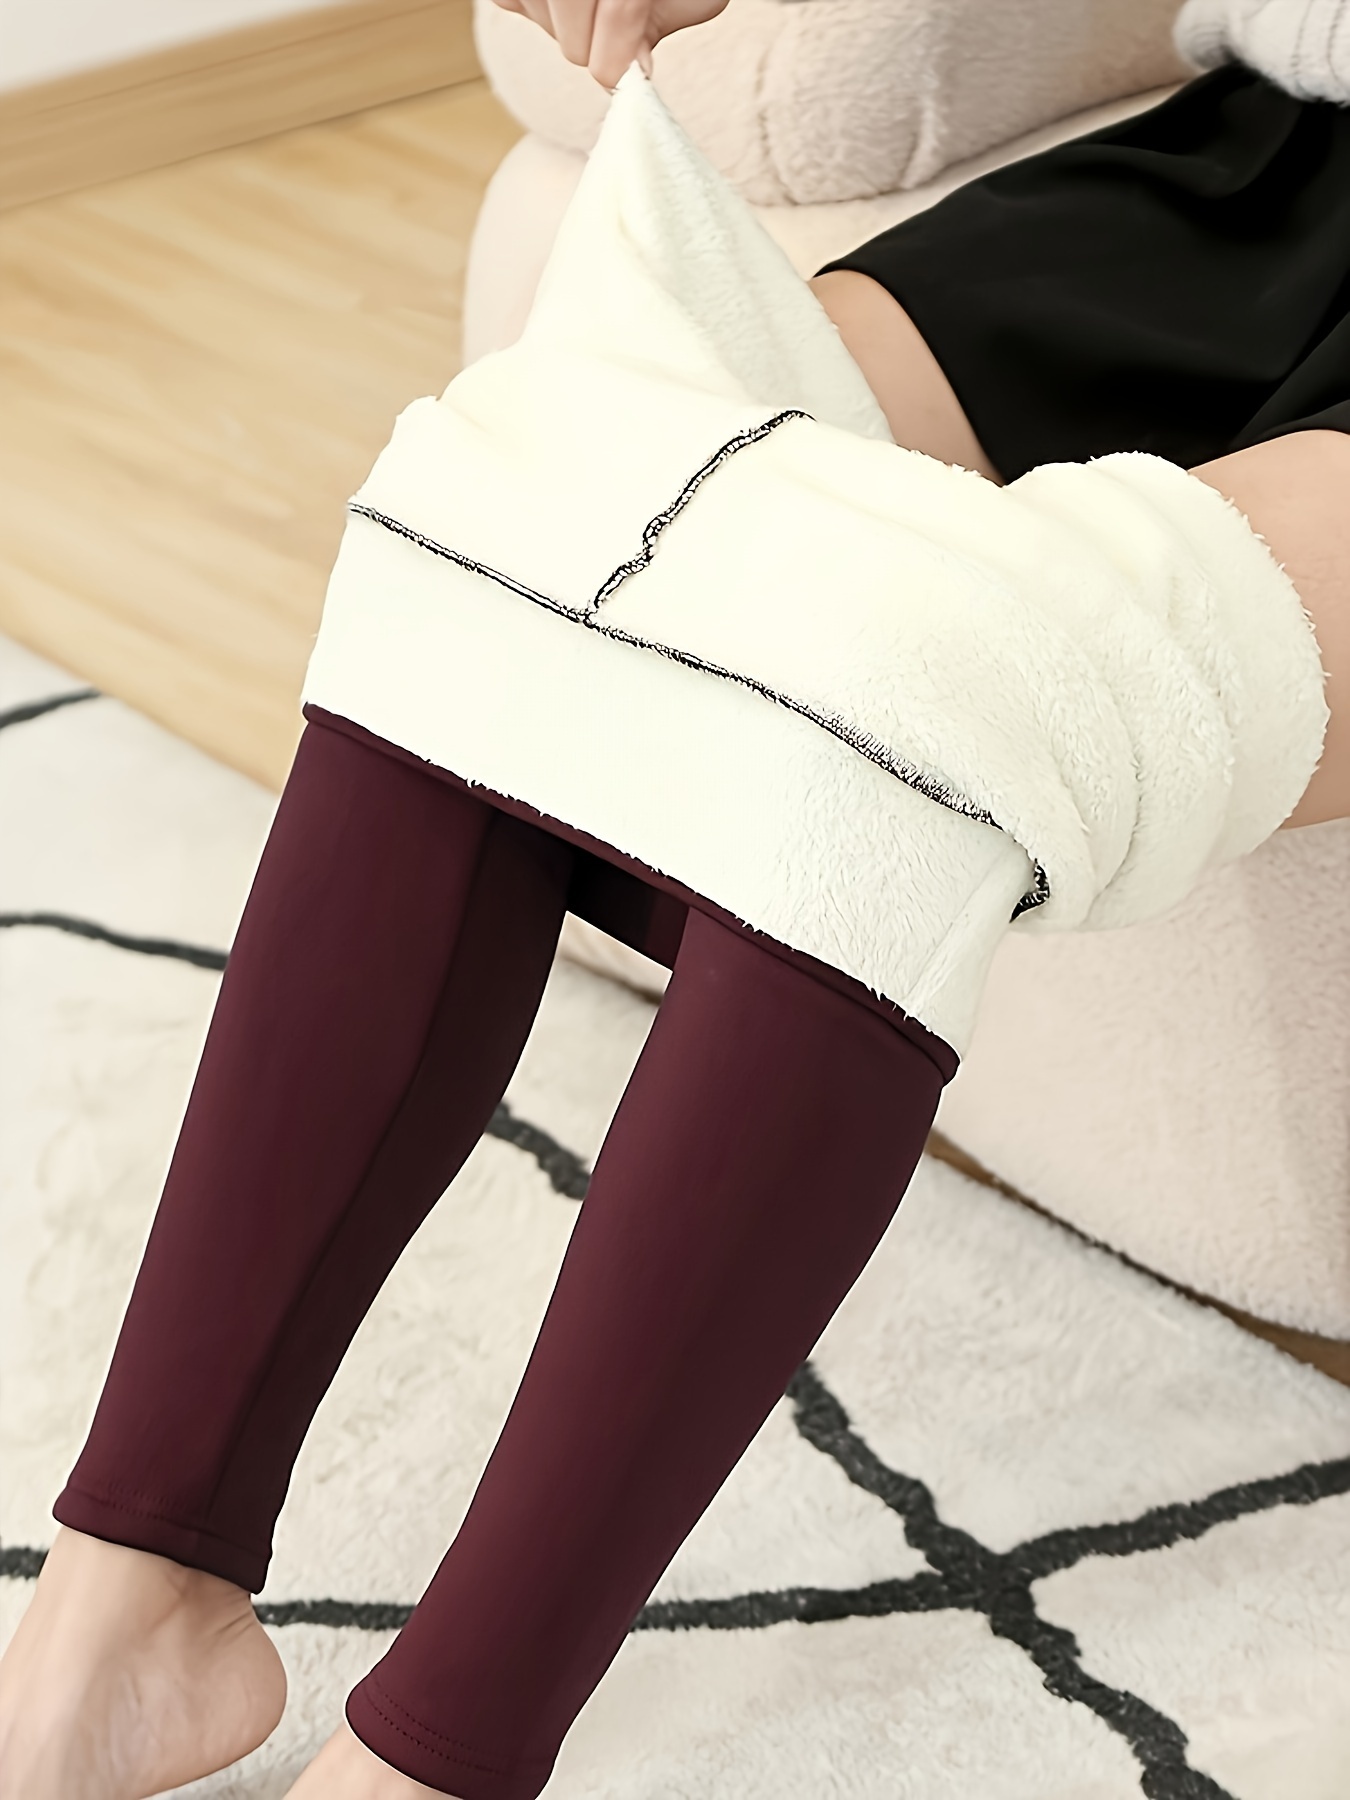 New In: Fleece Lined Leggings To Wear This Winter